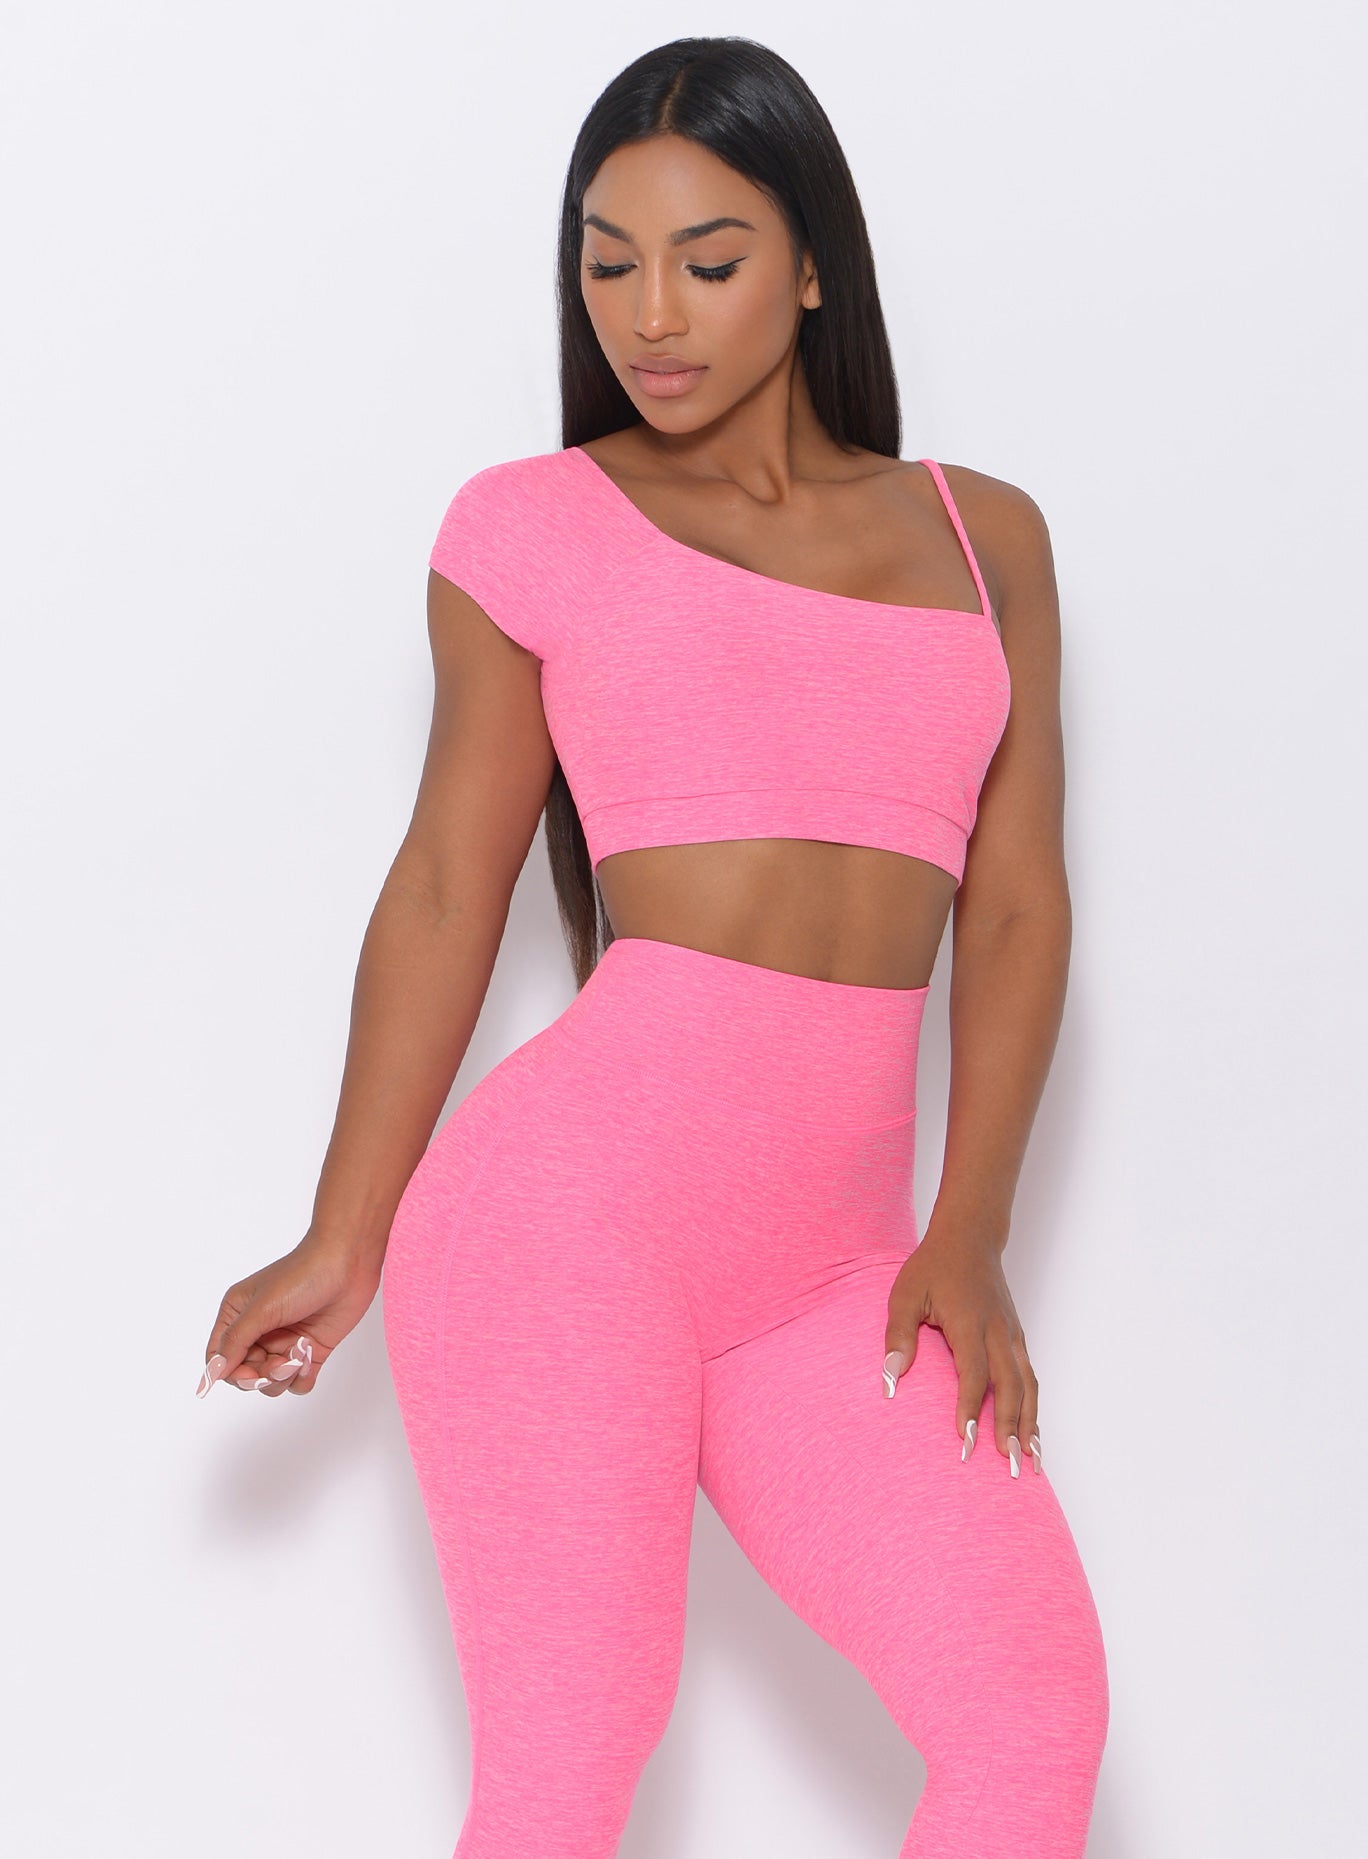 Front view of the model wearing our Adore Sports Bra in pink and a matching leggings